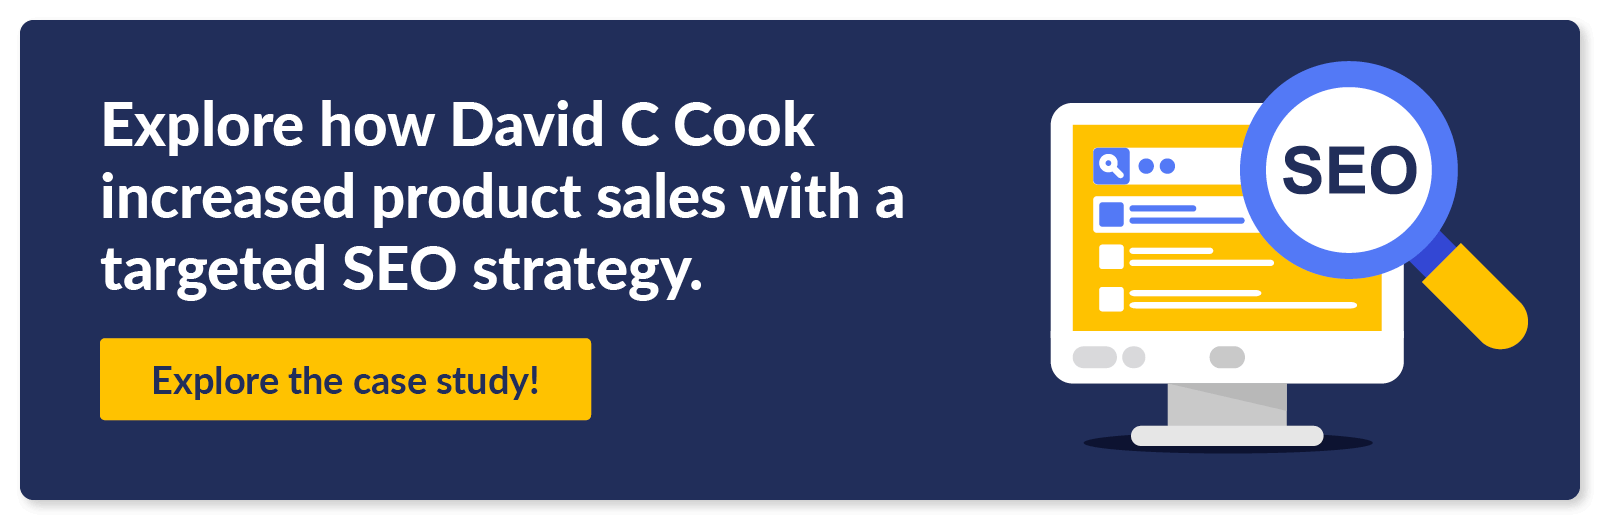 Click to explore the full case study to learn how David C Cook uses SEO as part of its content marketing strategy.